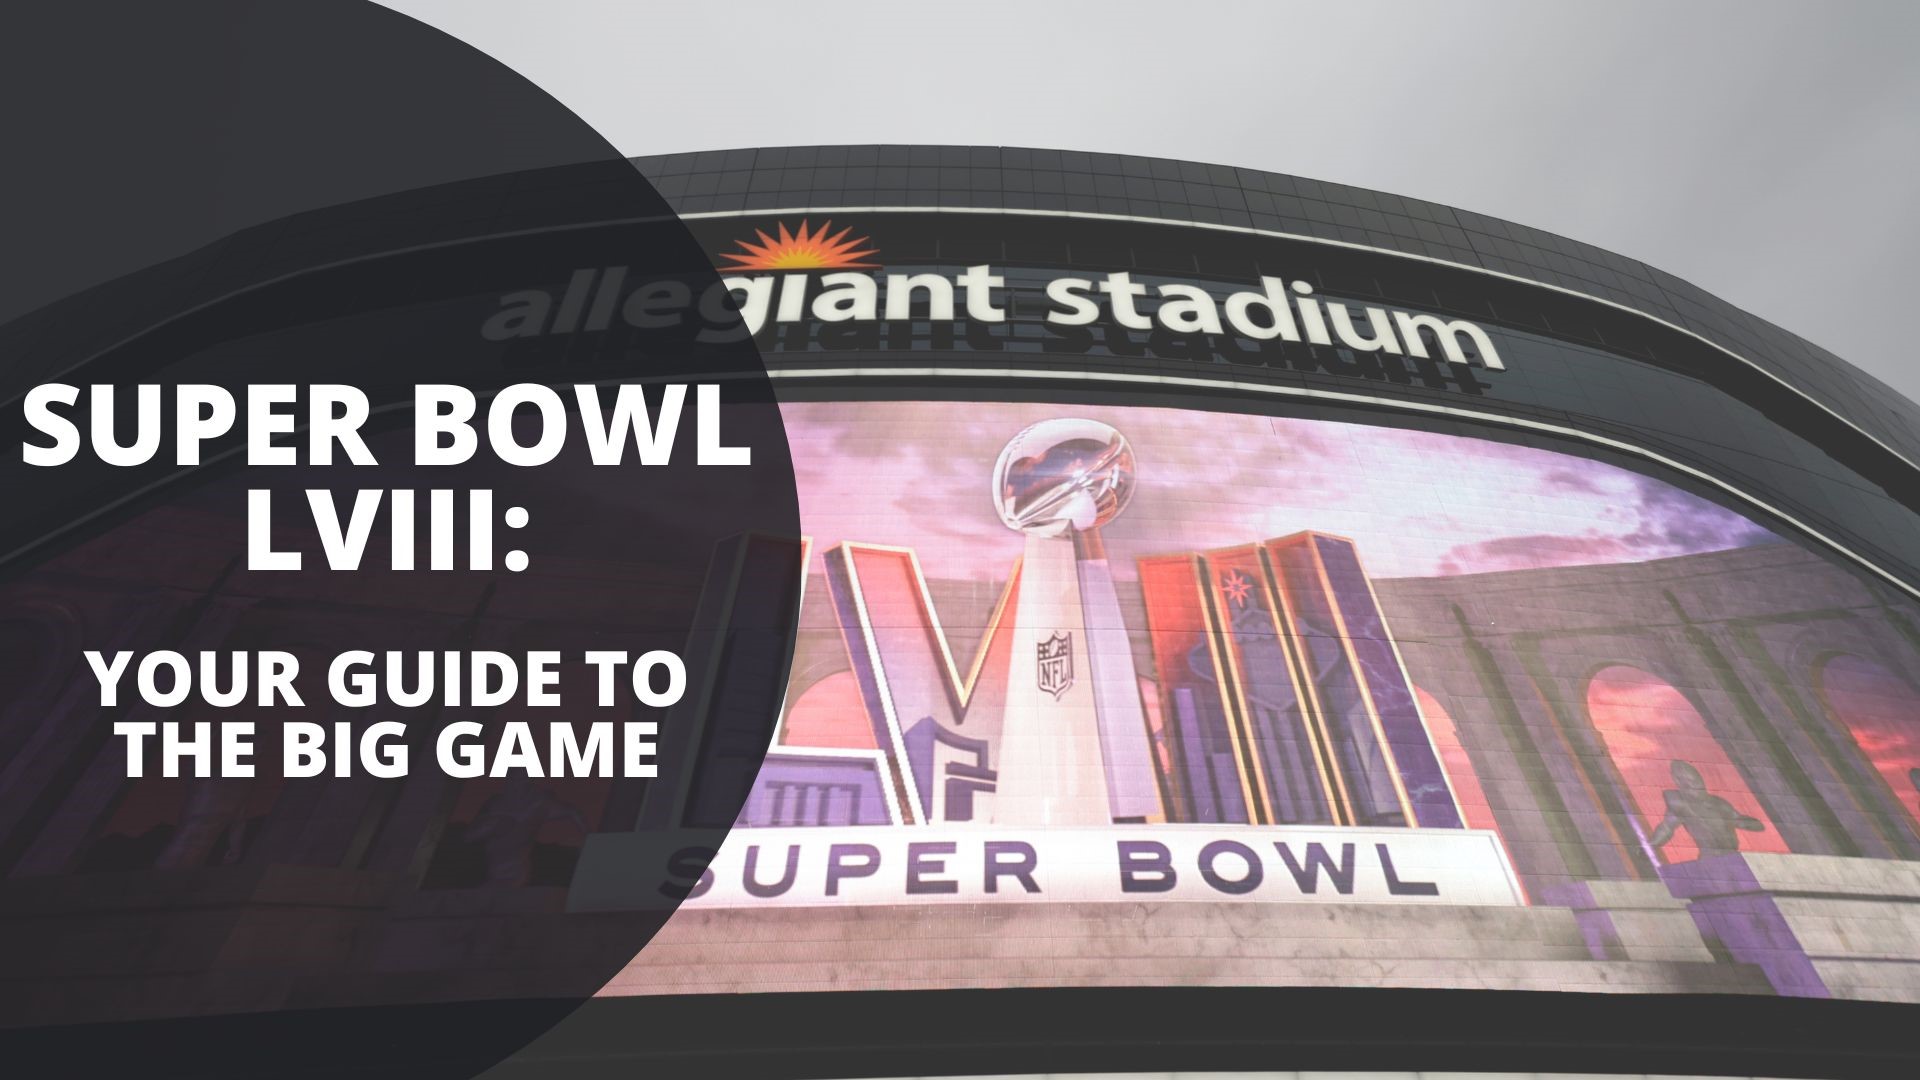 From the halftime show to the commercials and who is competing on the field, we have you covered for Super Bowl Sunday. Here's a look at the game by the numbers.